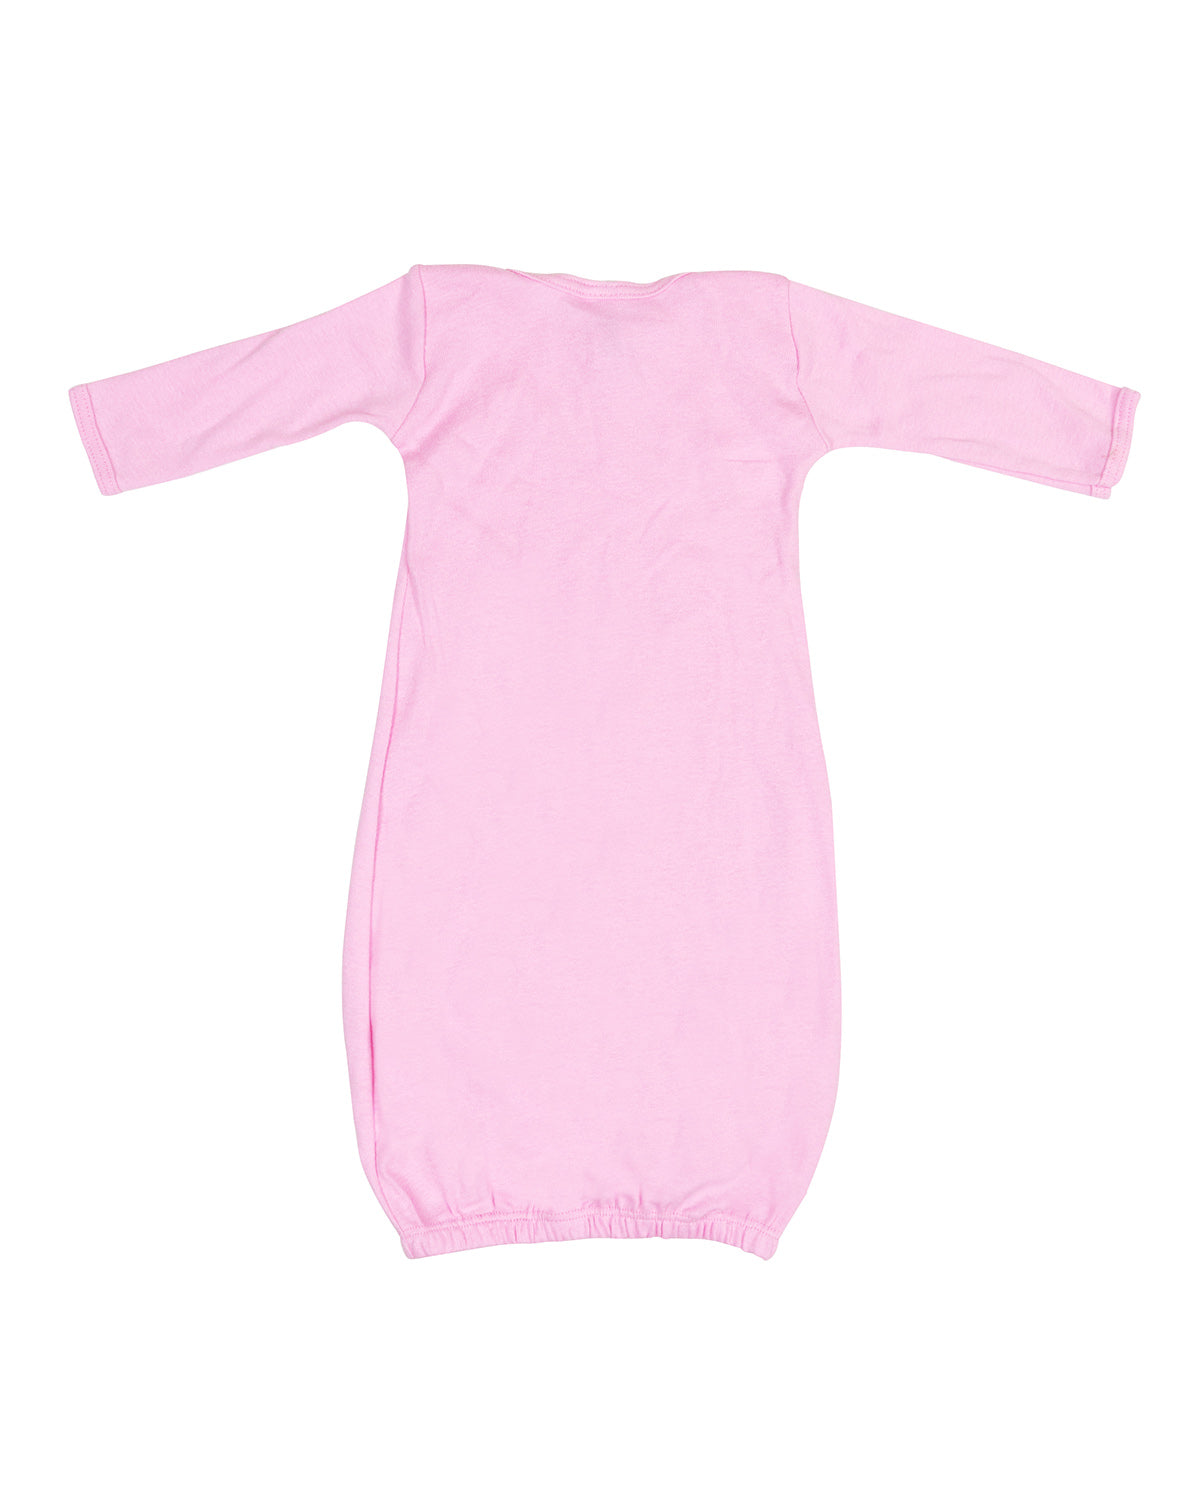 NEW Infant Gowns, 0-6 months, Overstock